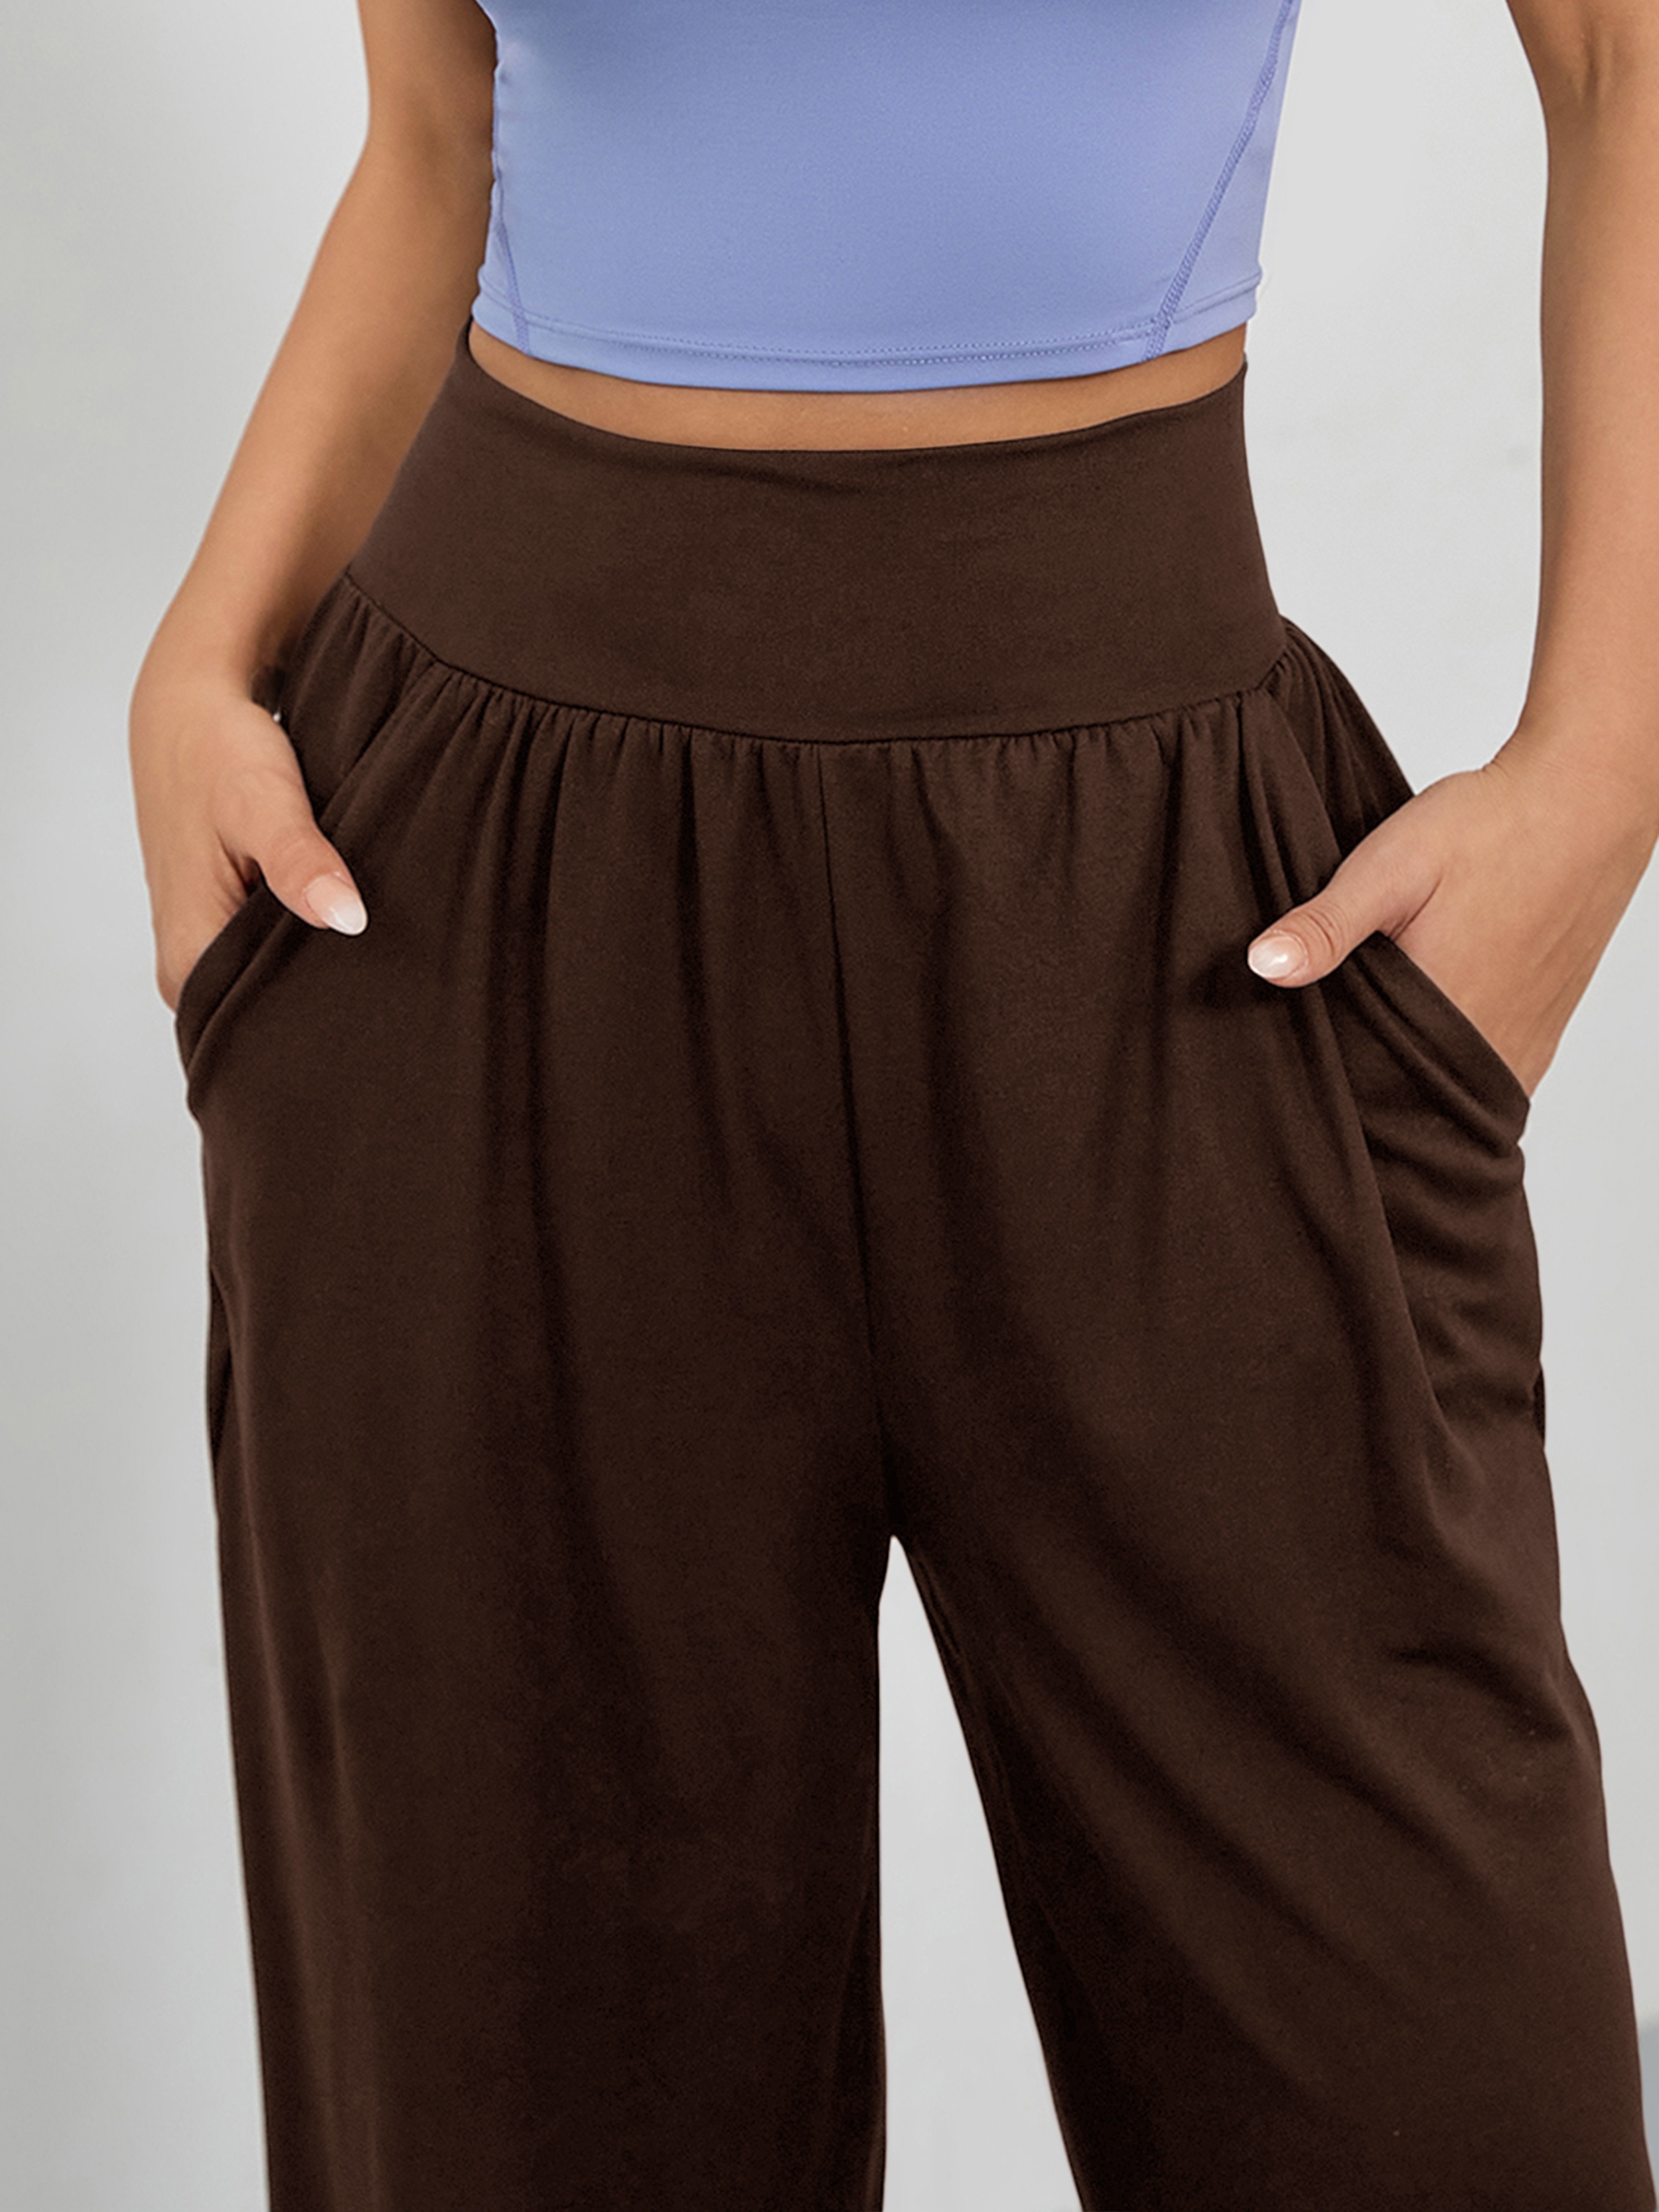 Womens Lounge Pants Elastic Waist Lightweight Casual Workout Loose  Sweatpant Brown Xl